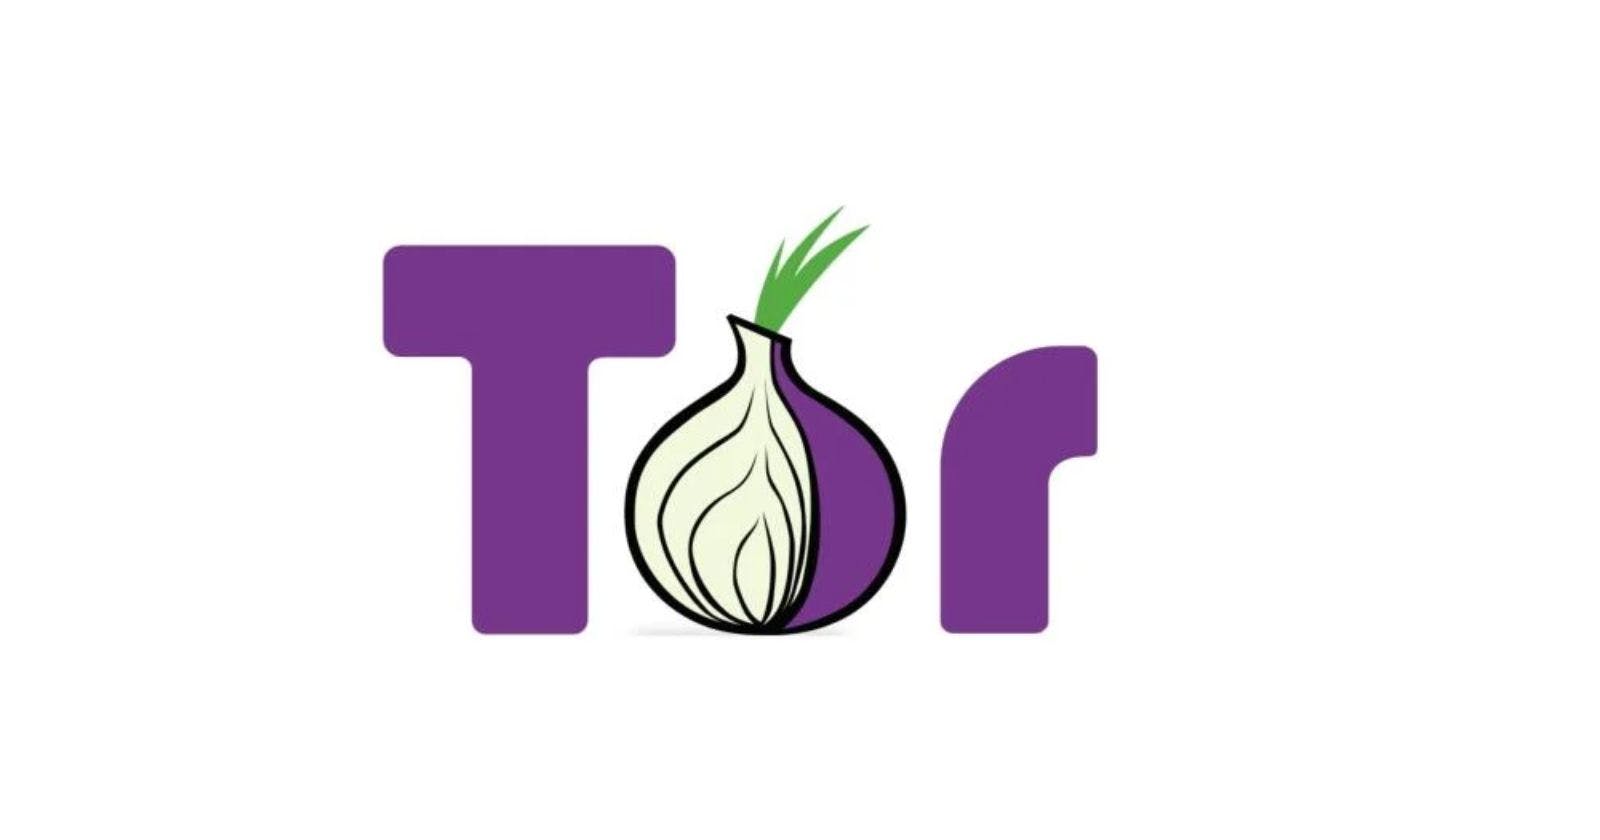 How to Install Tor in Kali Linux